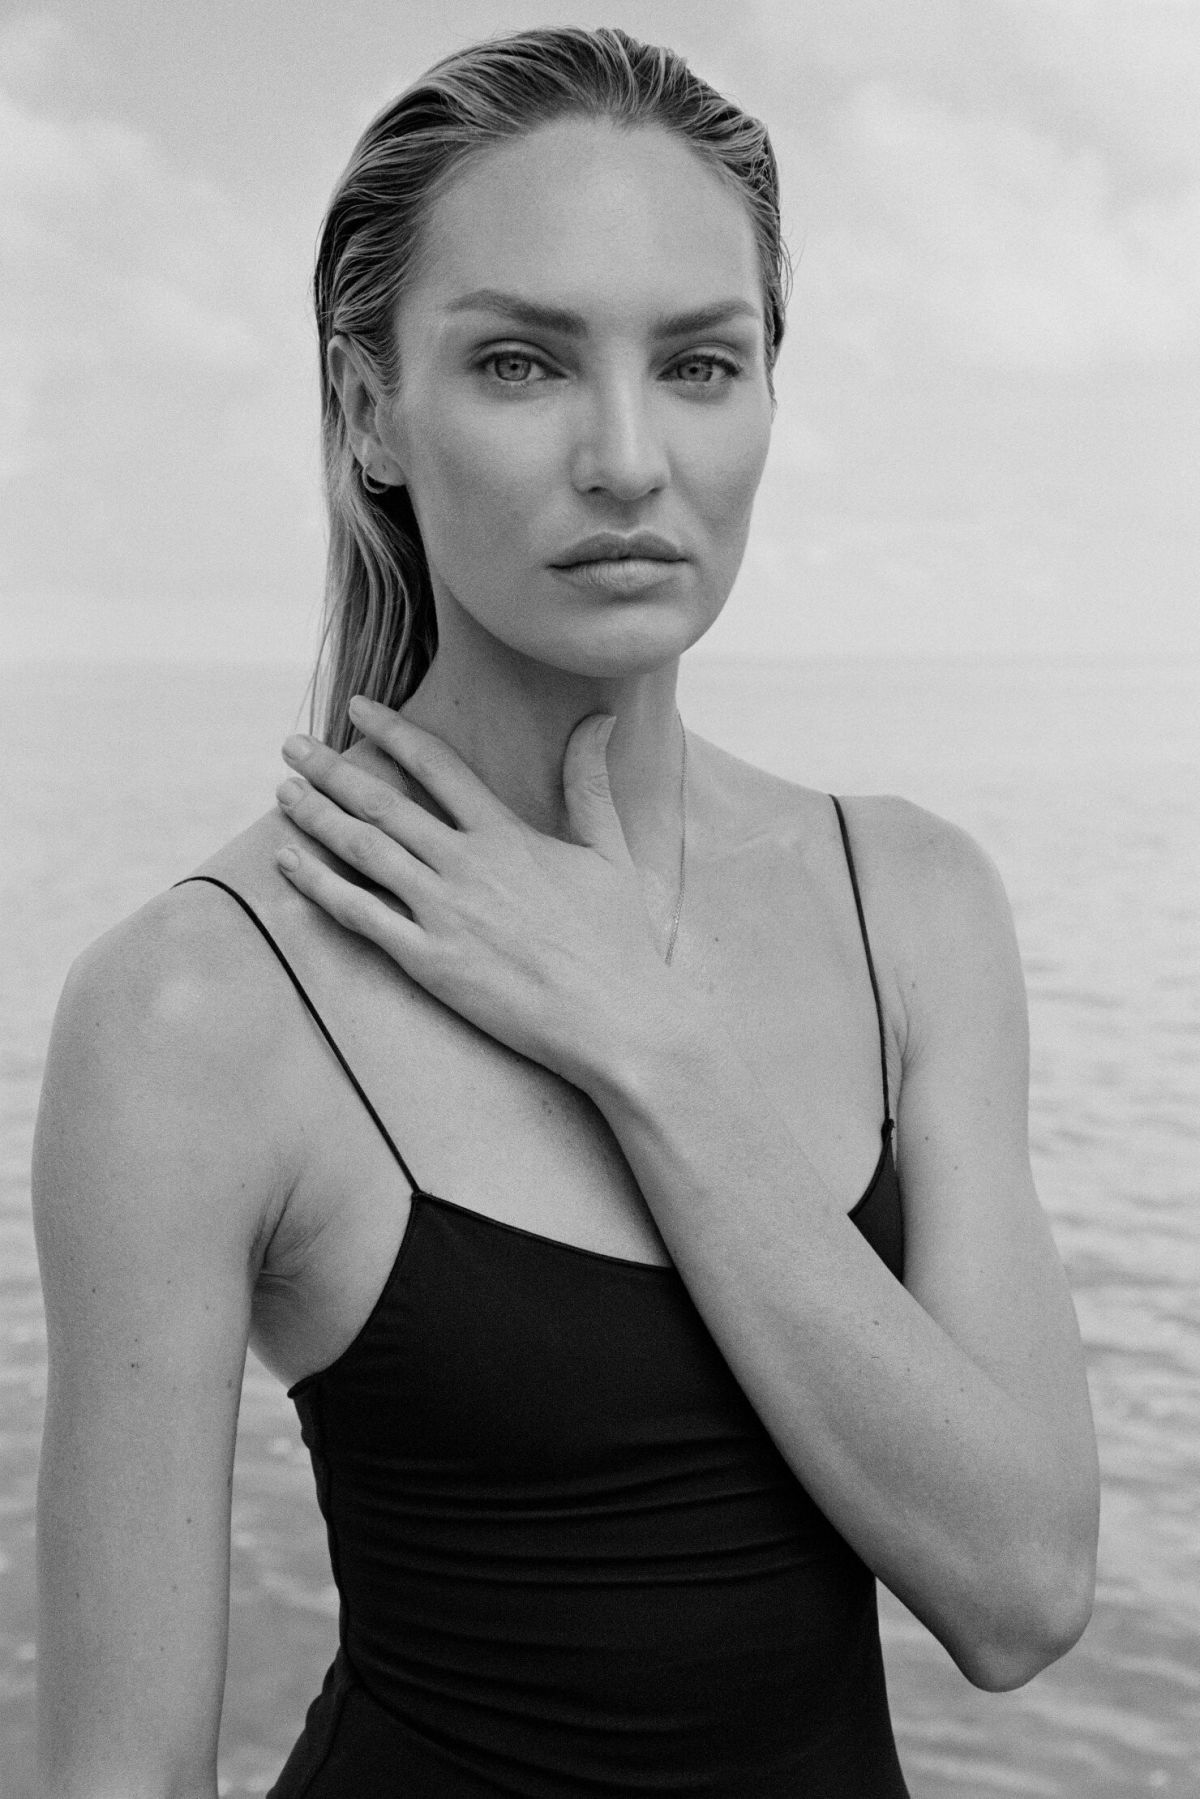 Candice Swanepoel Poses For The Camera! - Photo 8